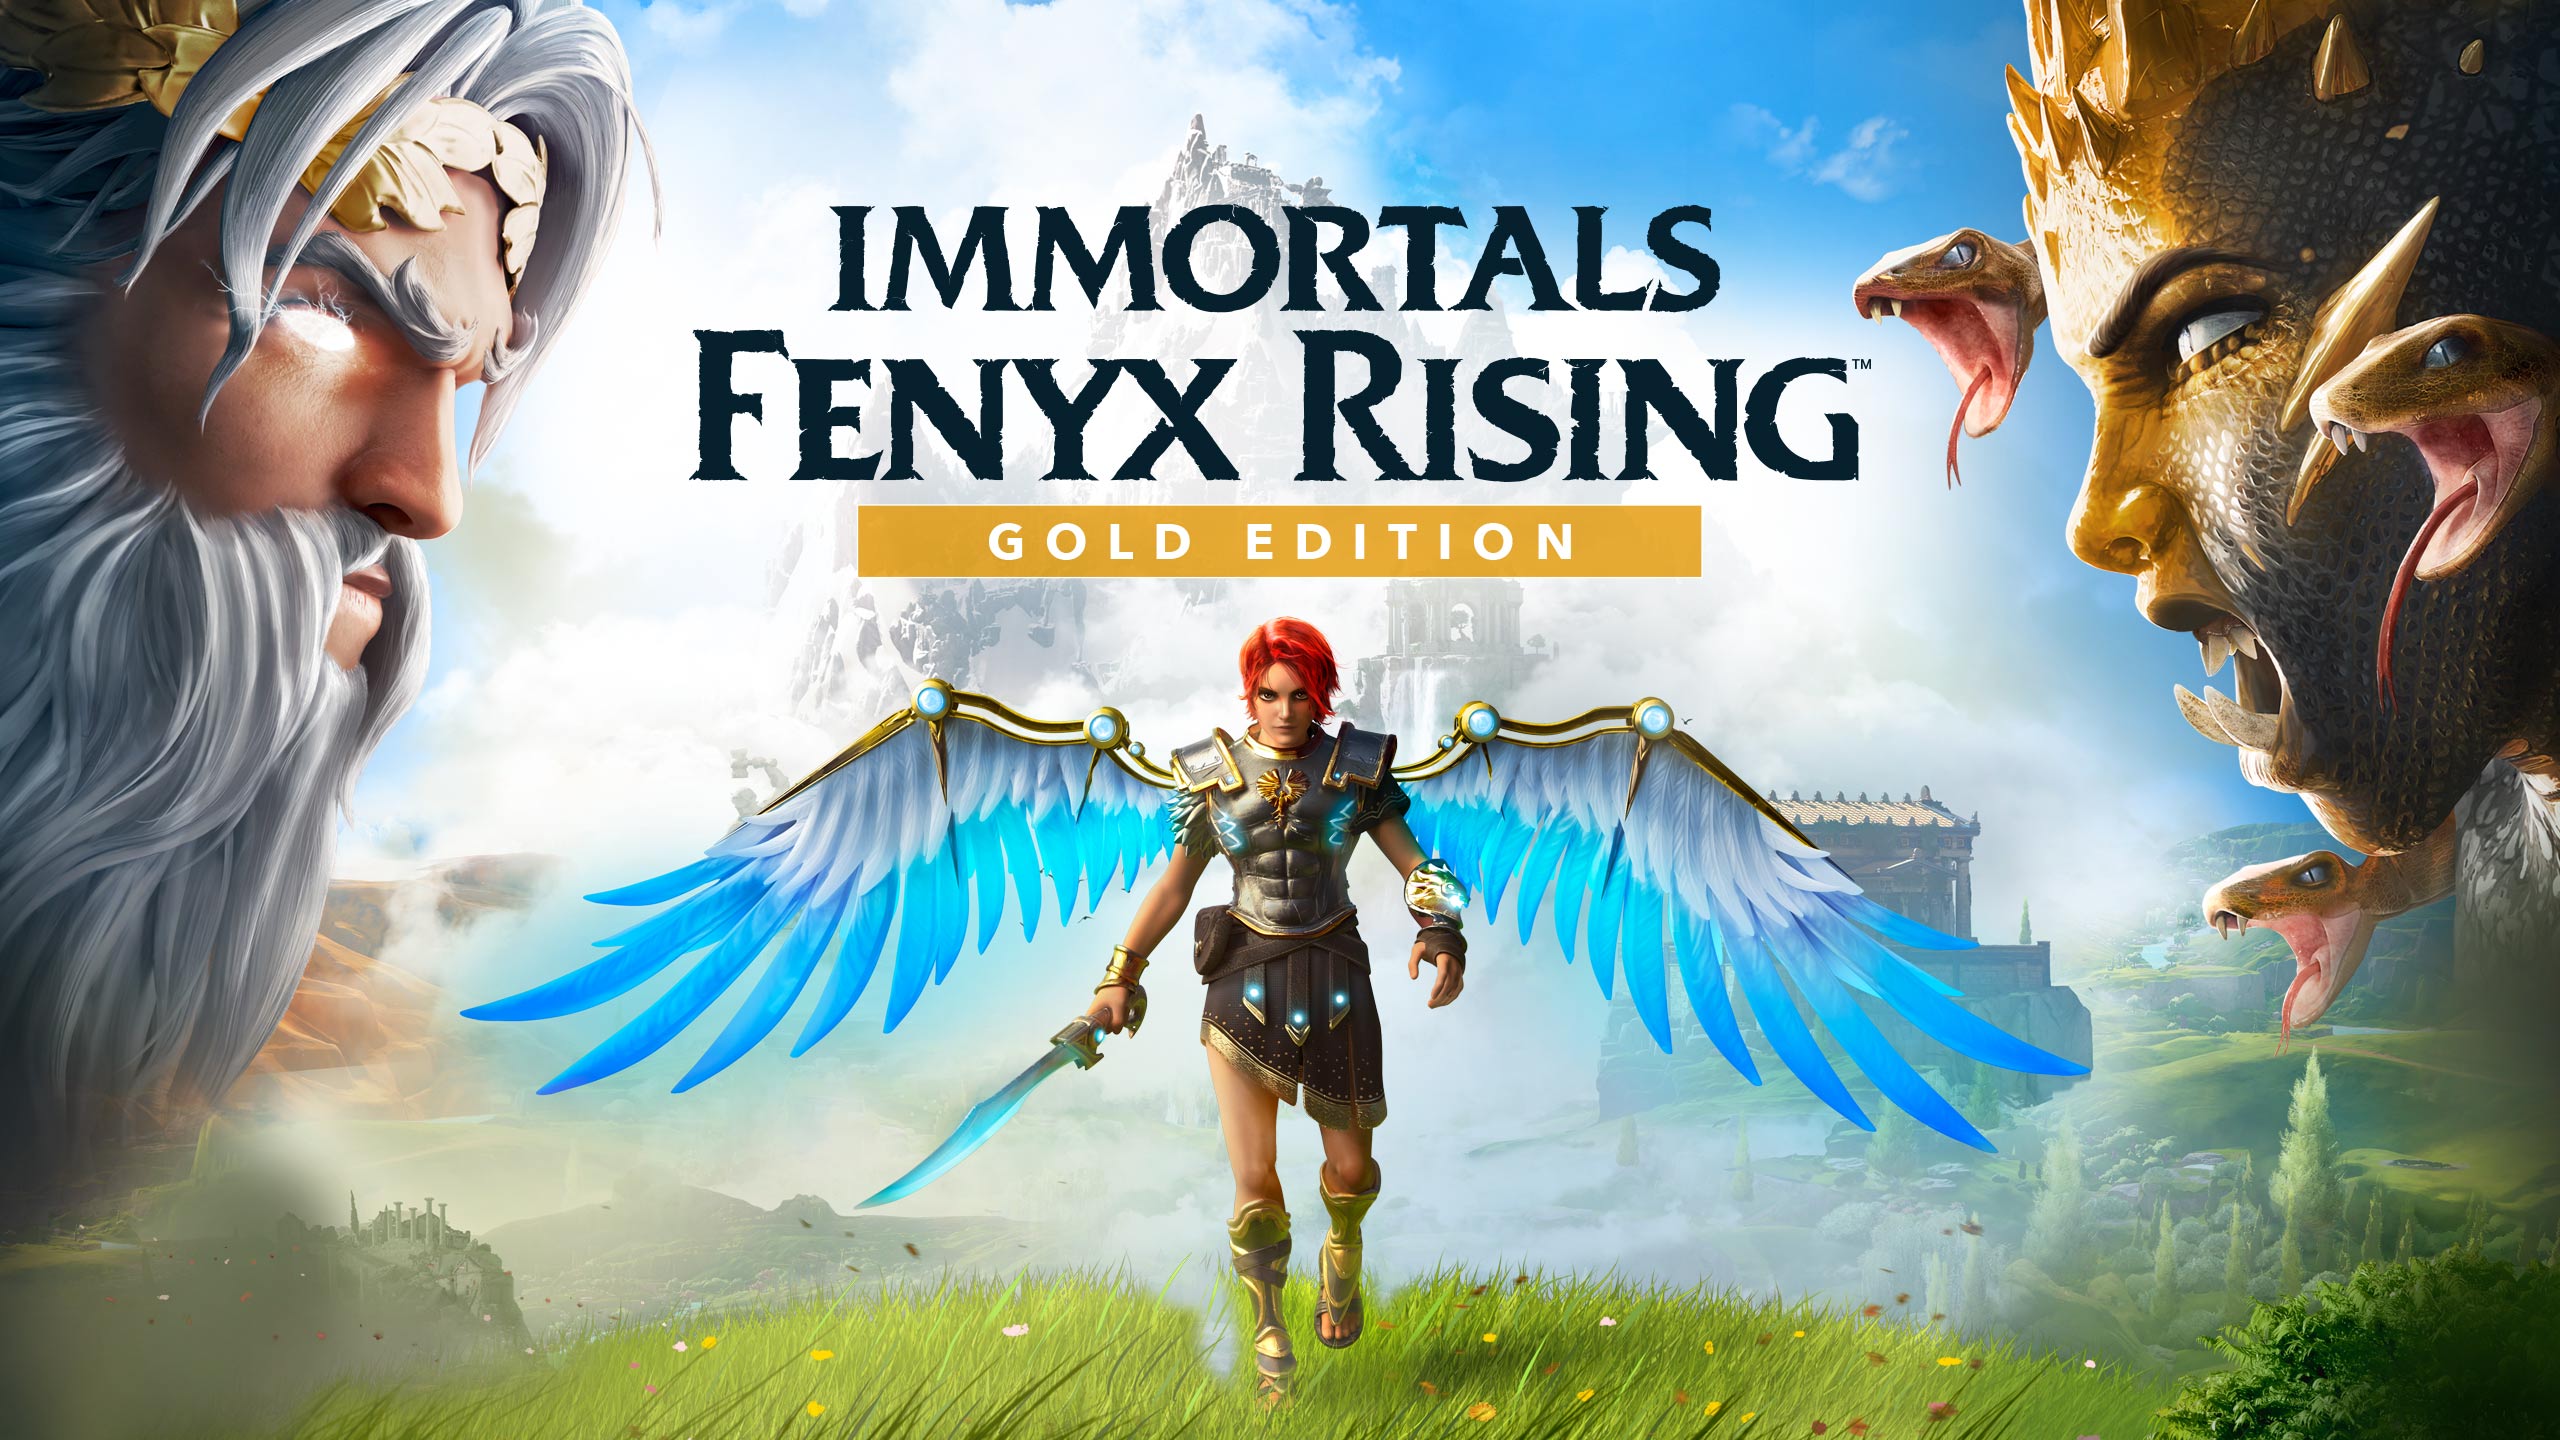 Immortals Fenyx Rising Uplay Ubisoft Connet